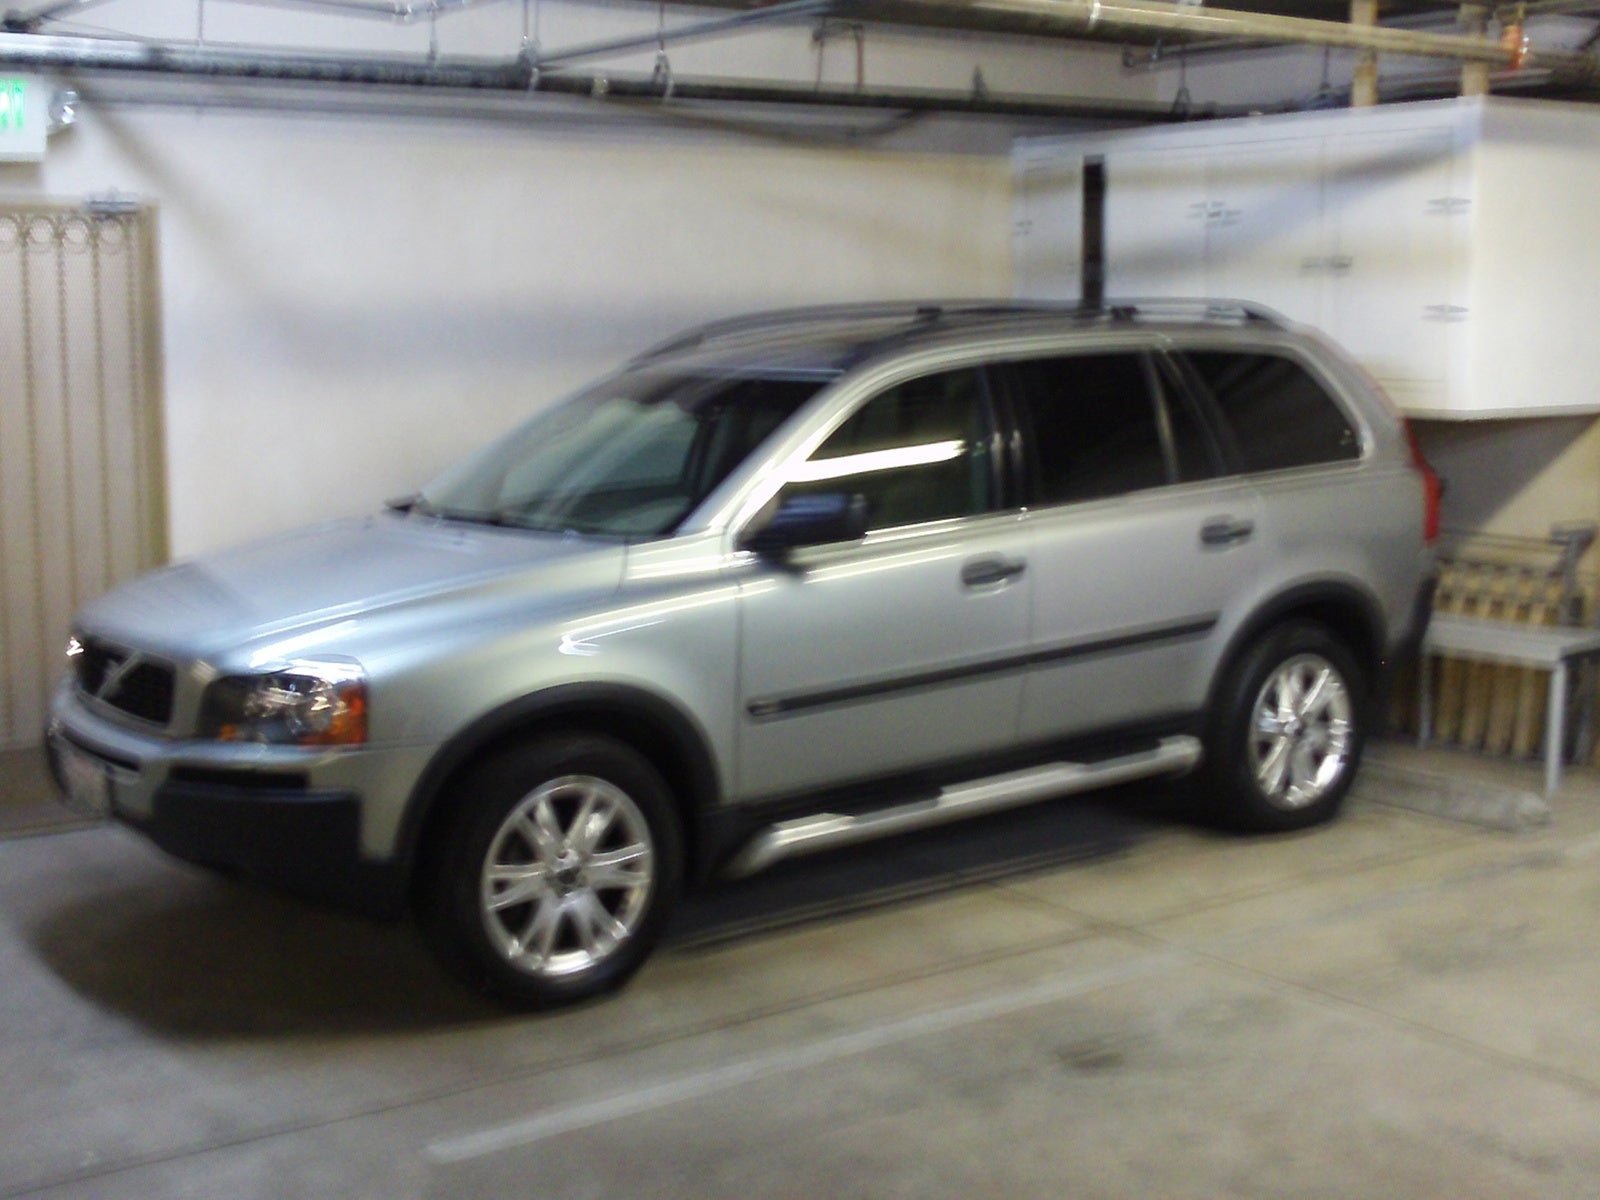 2004 Volvo Xc90 on 2004 Volvo Xc90 2 5t Picture View Garage Champ Owns This Volvo Xc90